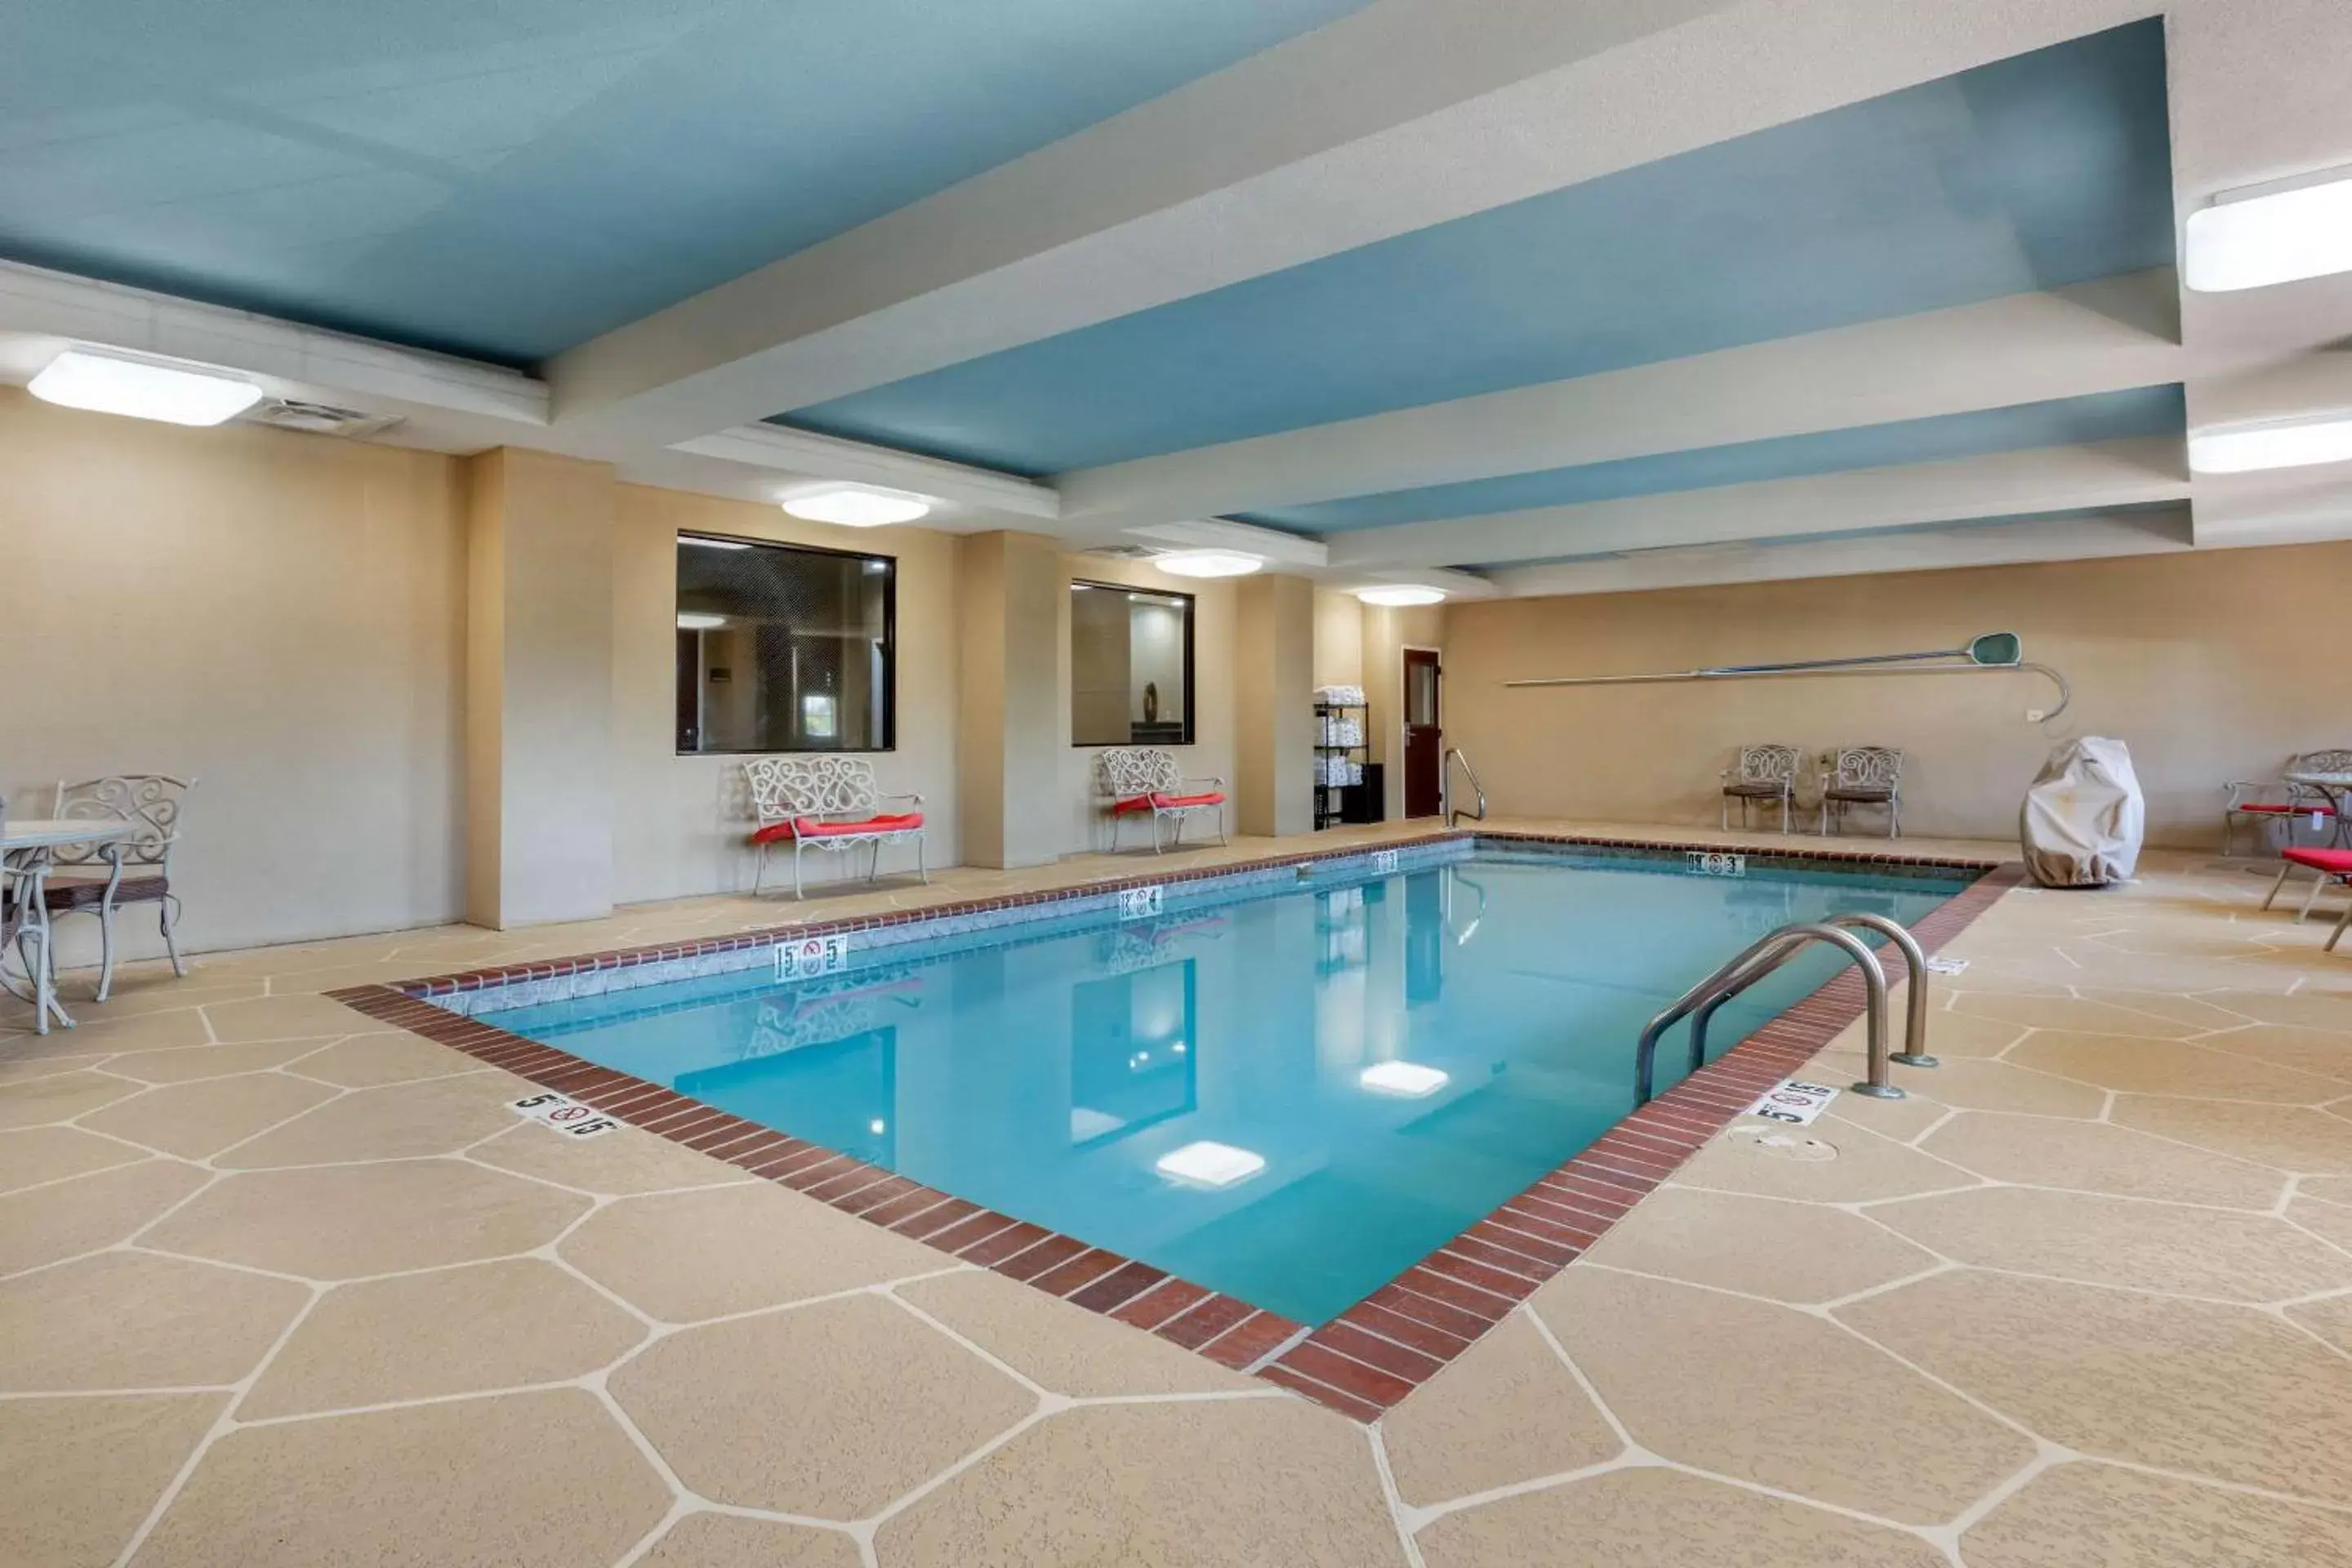 On site, Swimming Pool in Comfort Inn & Suites North Little Rock McCain Mall